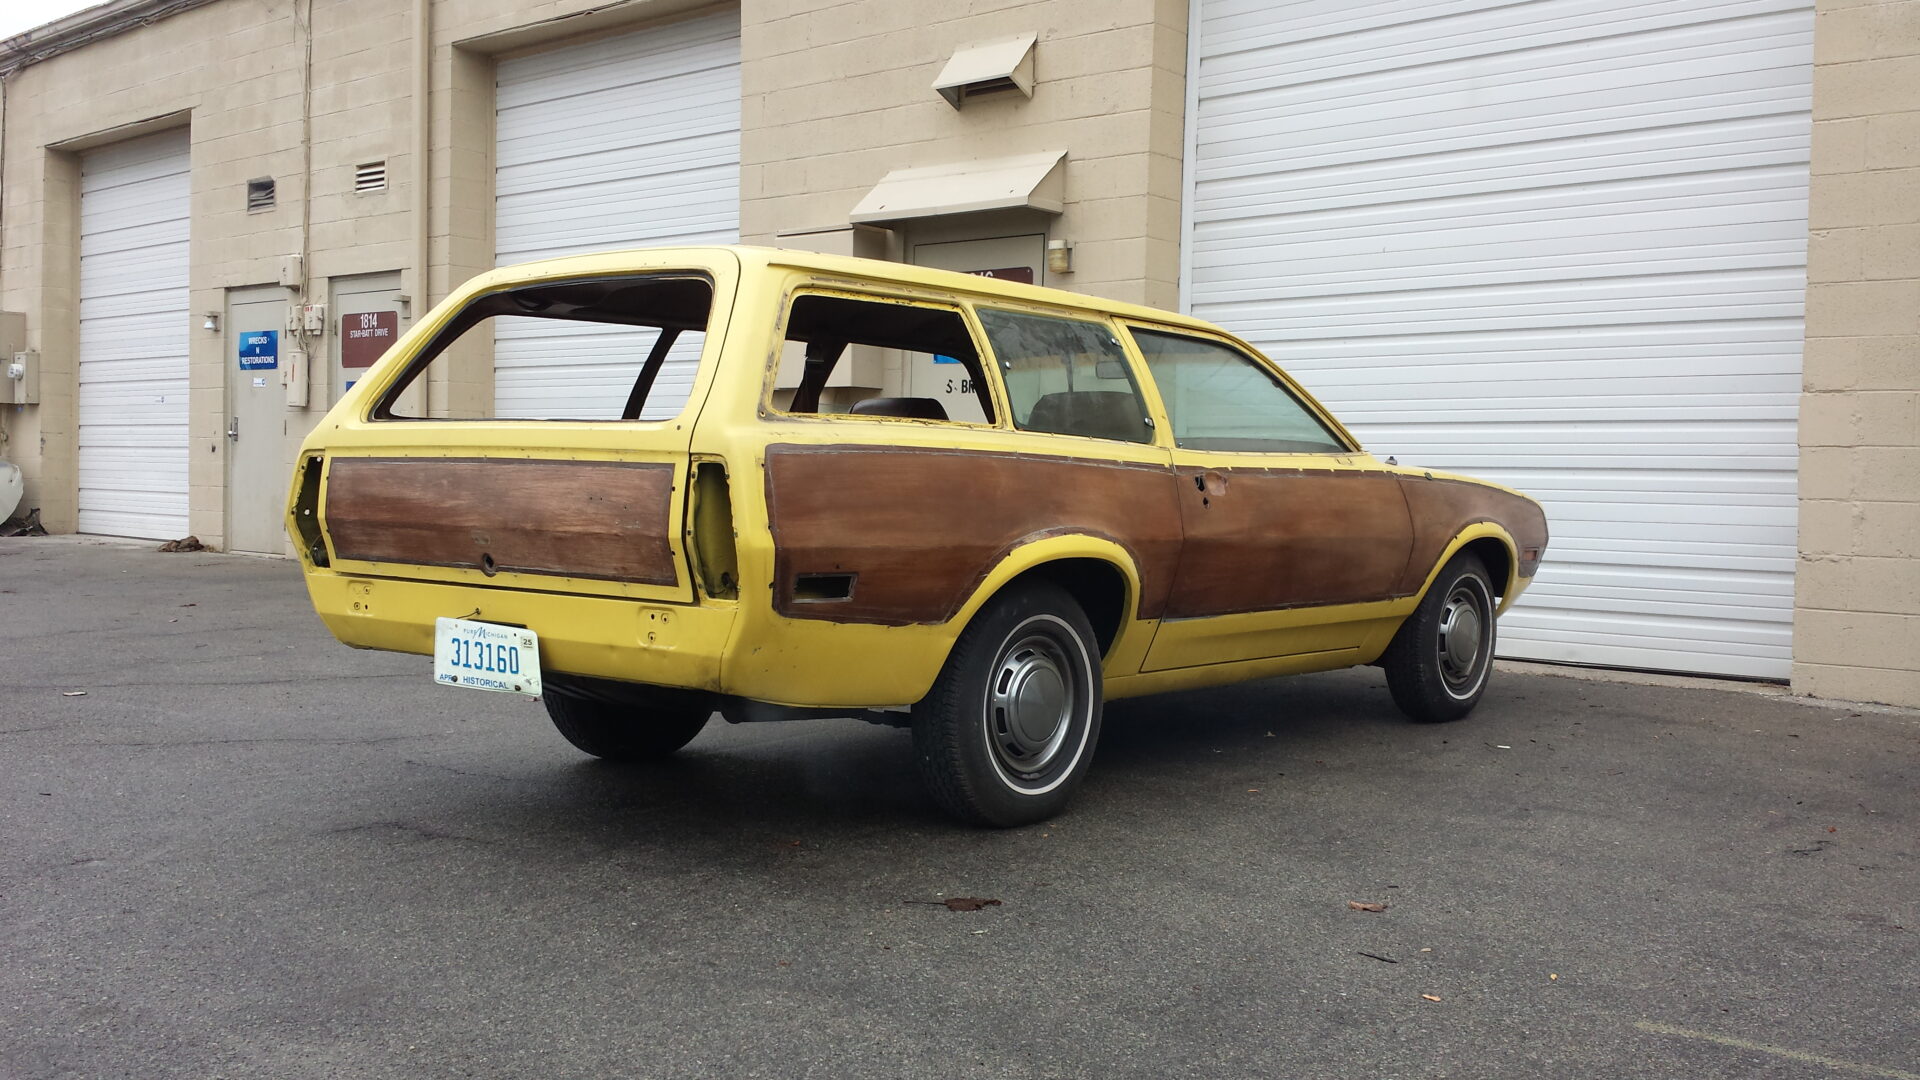 A worn down 1972 Ford Pinto